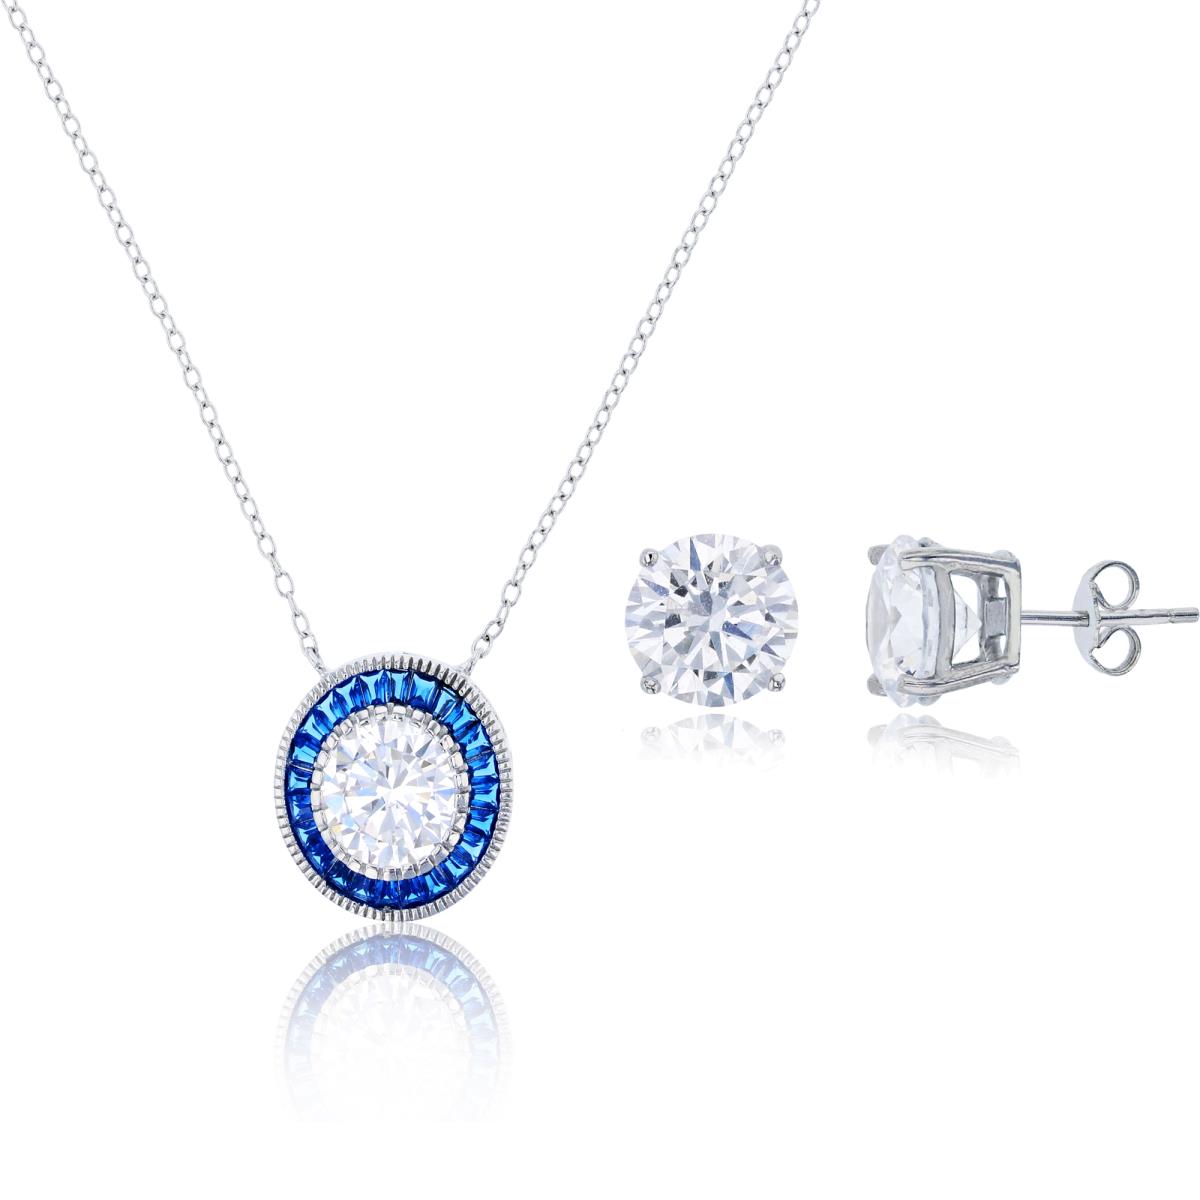 Sterling Silver Rhodium 8mm Rd & Blue Spinel Bgt Circle 16"+2" Necklace with 8mm Rd Solitaire Stud Earring Set 